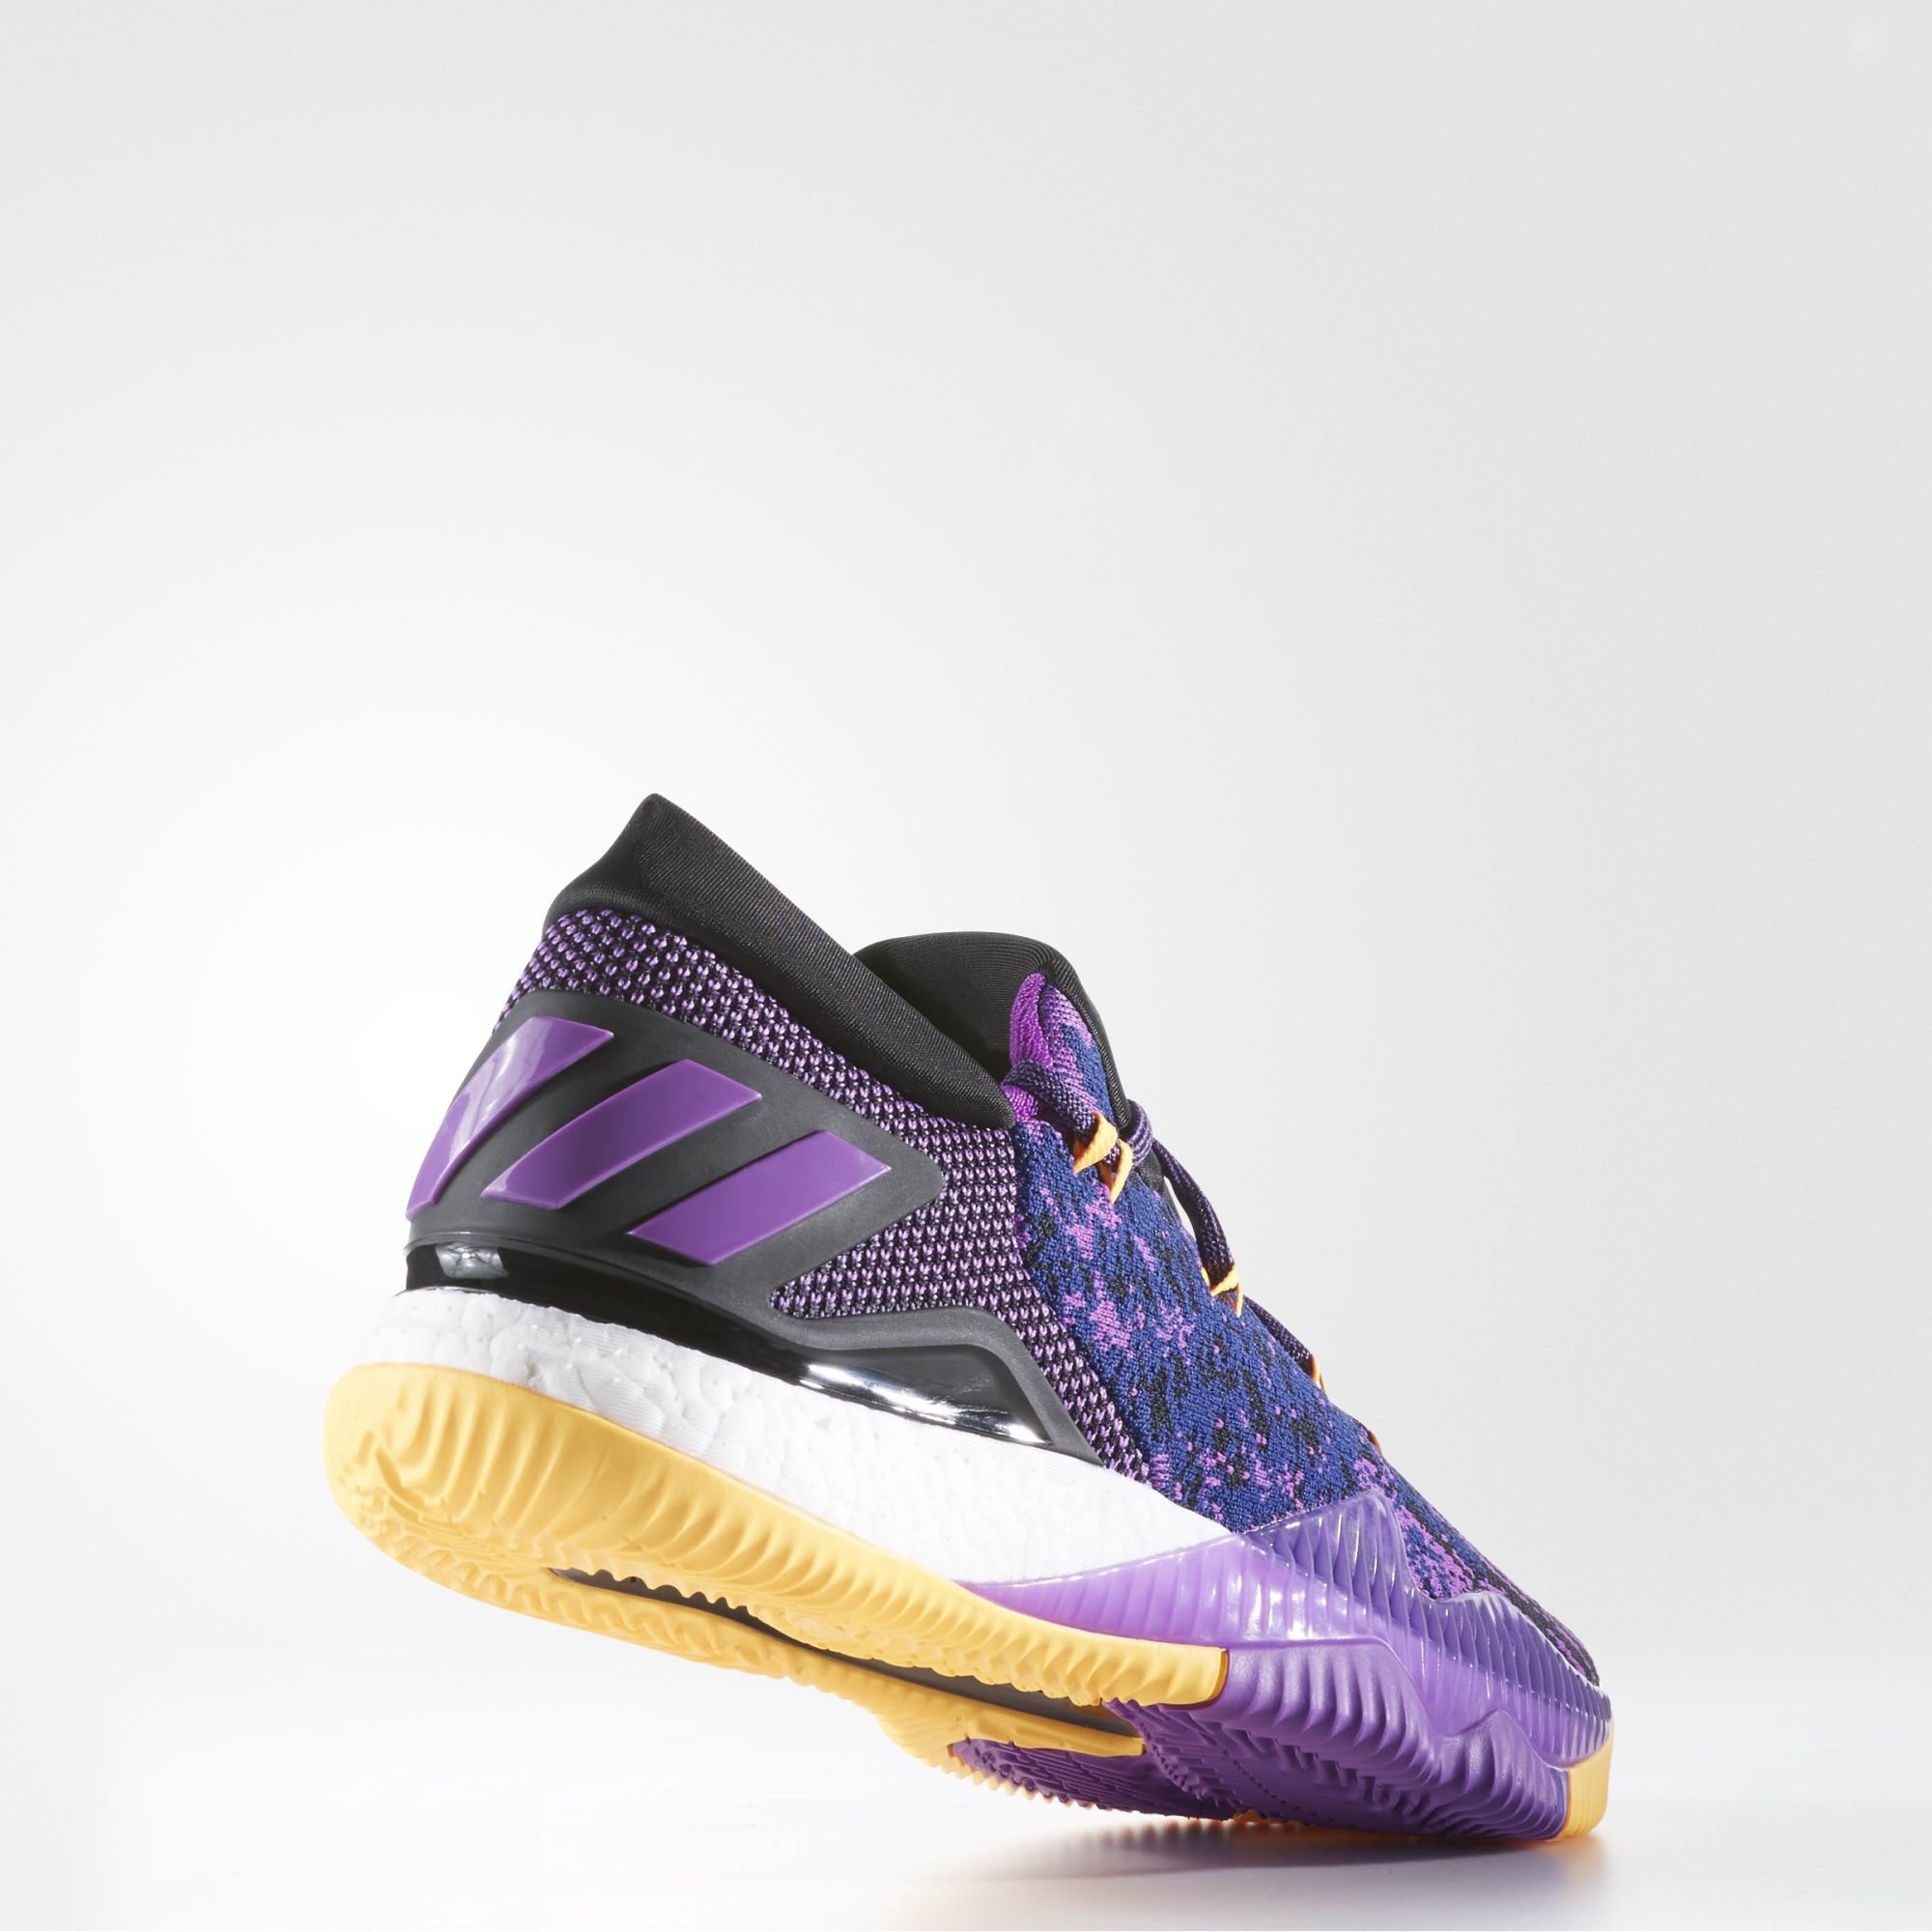 adidas Crazy Light Boost 2016 Primeknit Swaggy P - Heel Angle